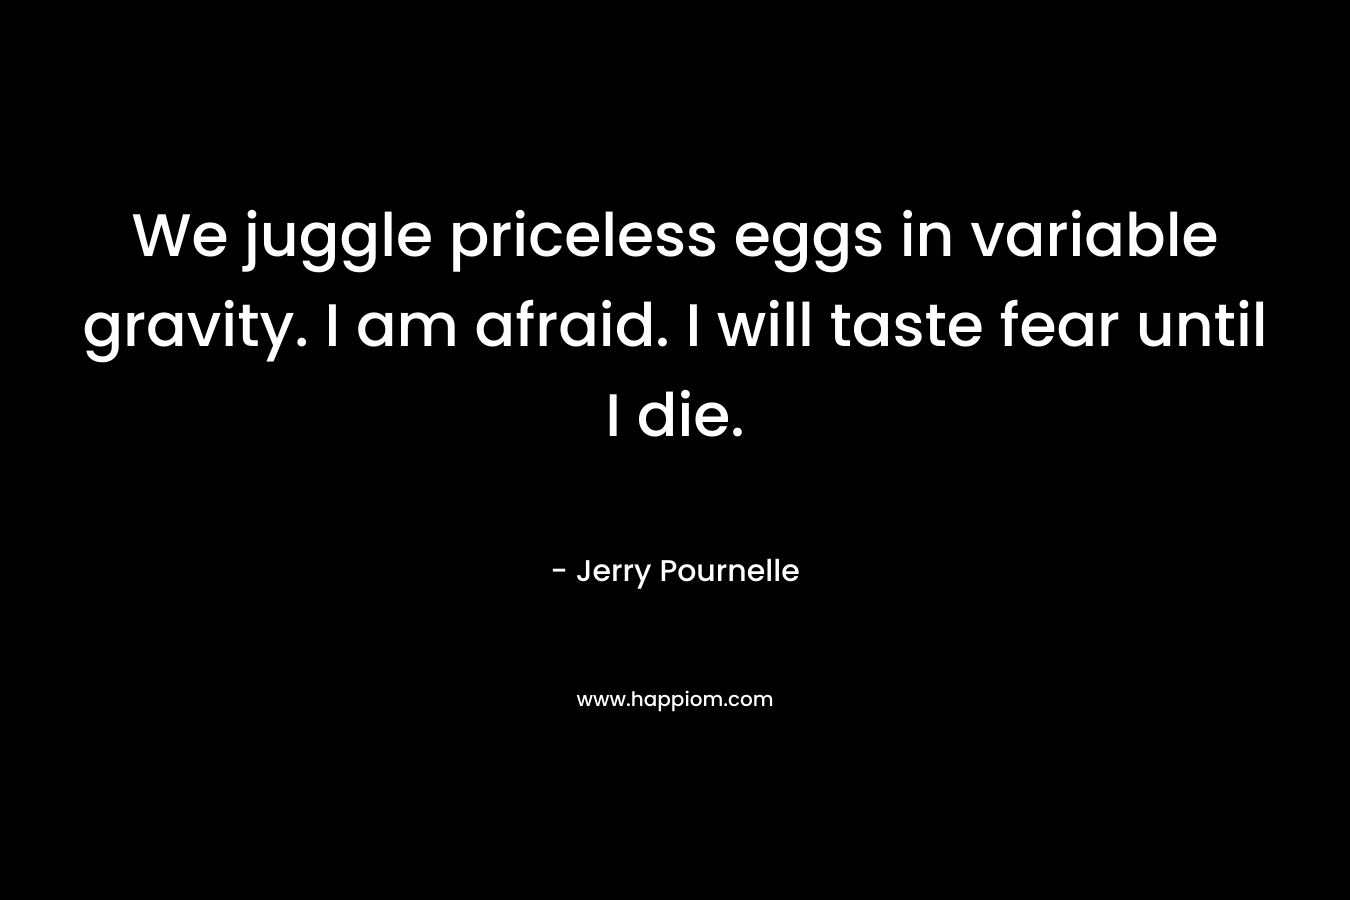 We juggle priceless eggs in variable gravity. I am afraid. I will taste fear until I die.